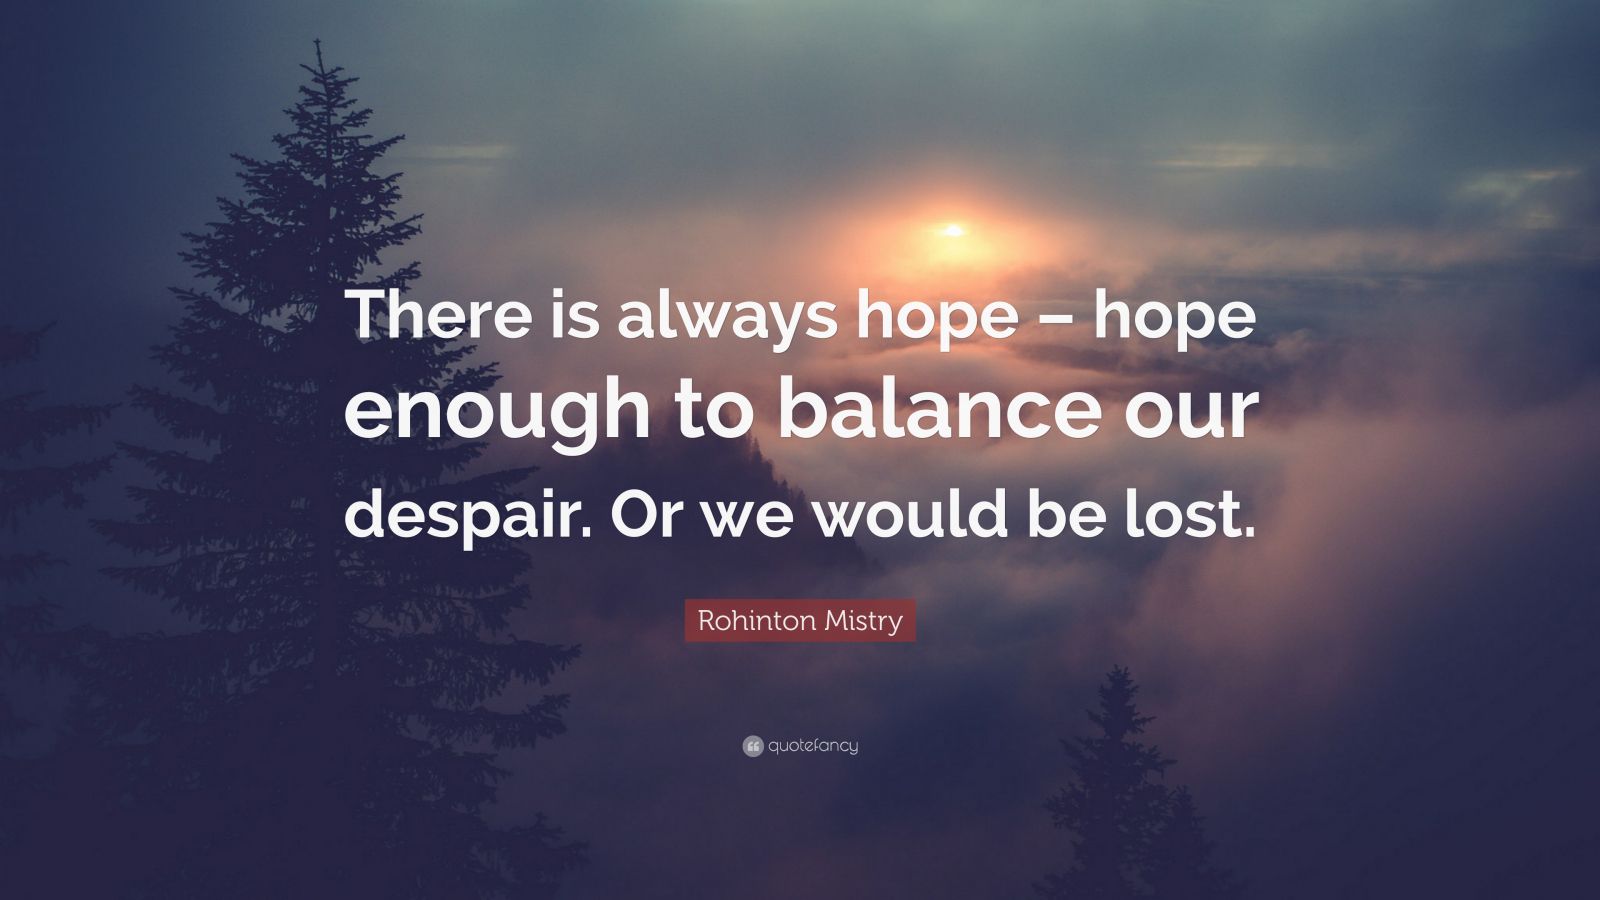 Rohinton Mistry Quote: “There is always hope – hope enough to balance ...